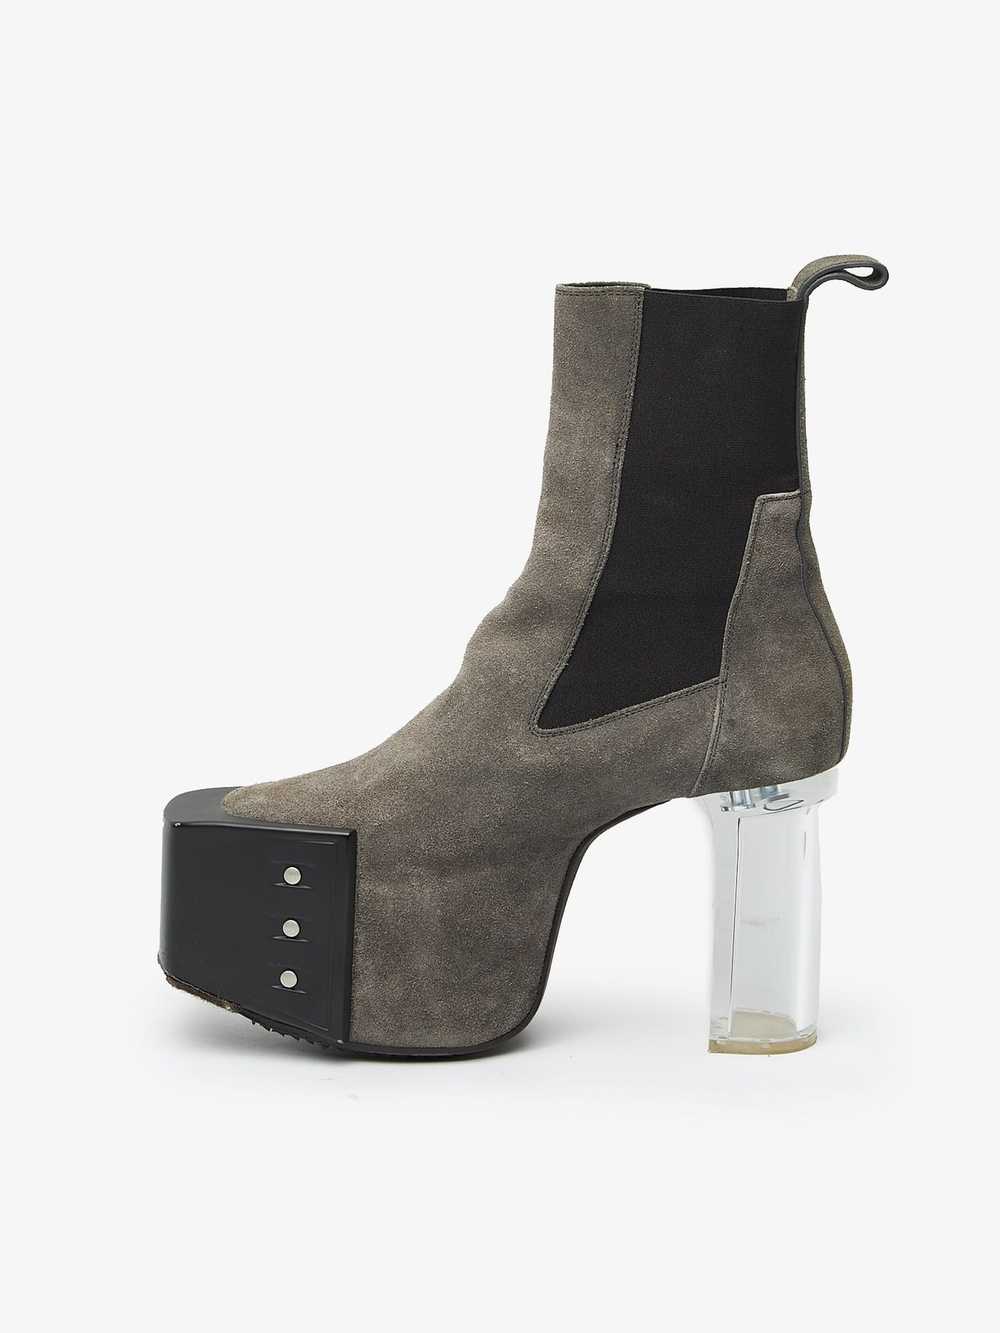 Rick Owens Gray Suede Kiss Suede Heel Boots - image 3